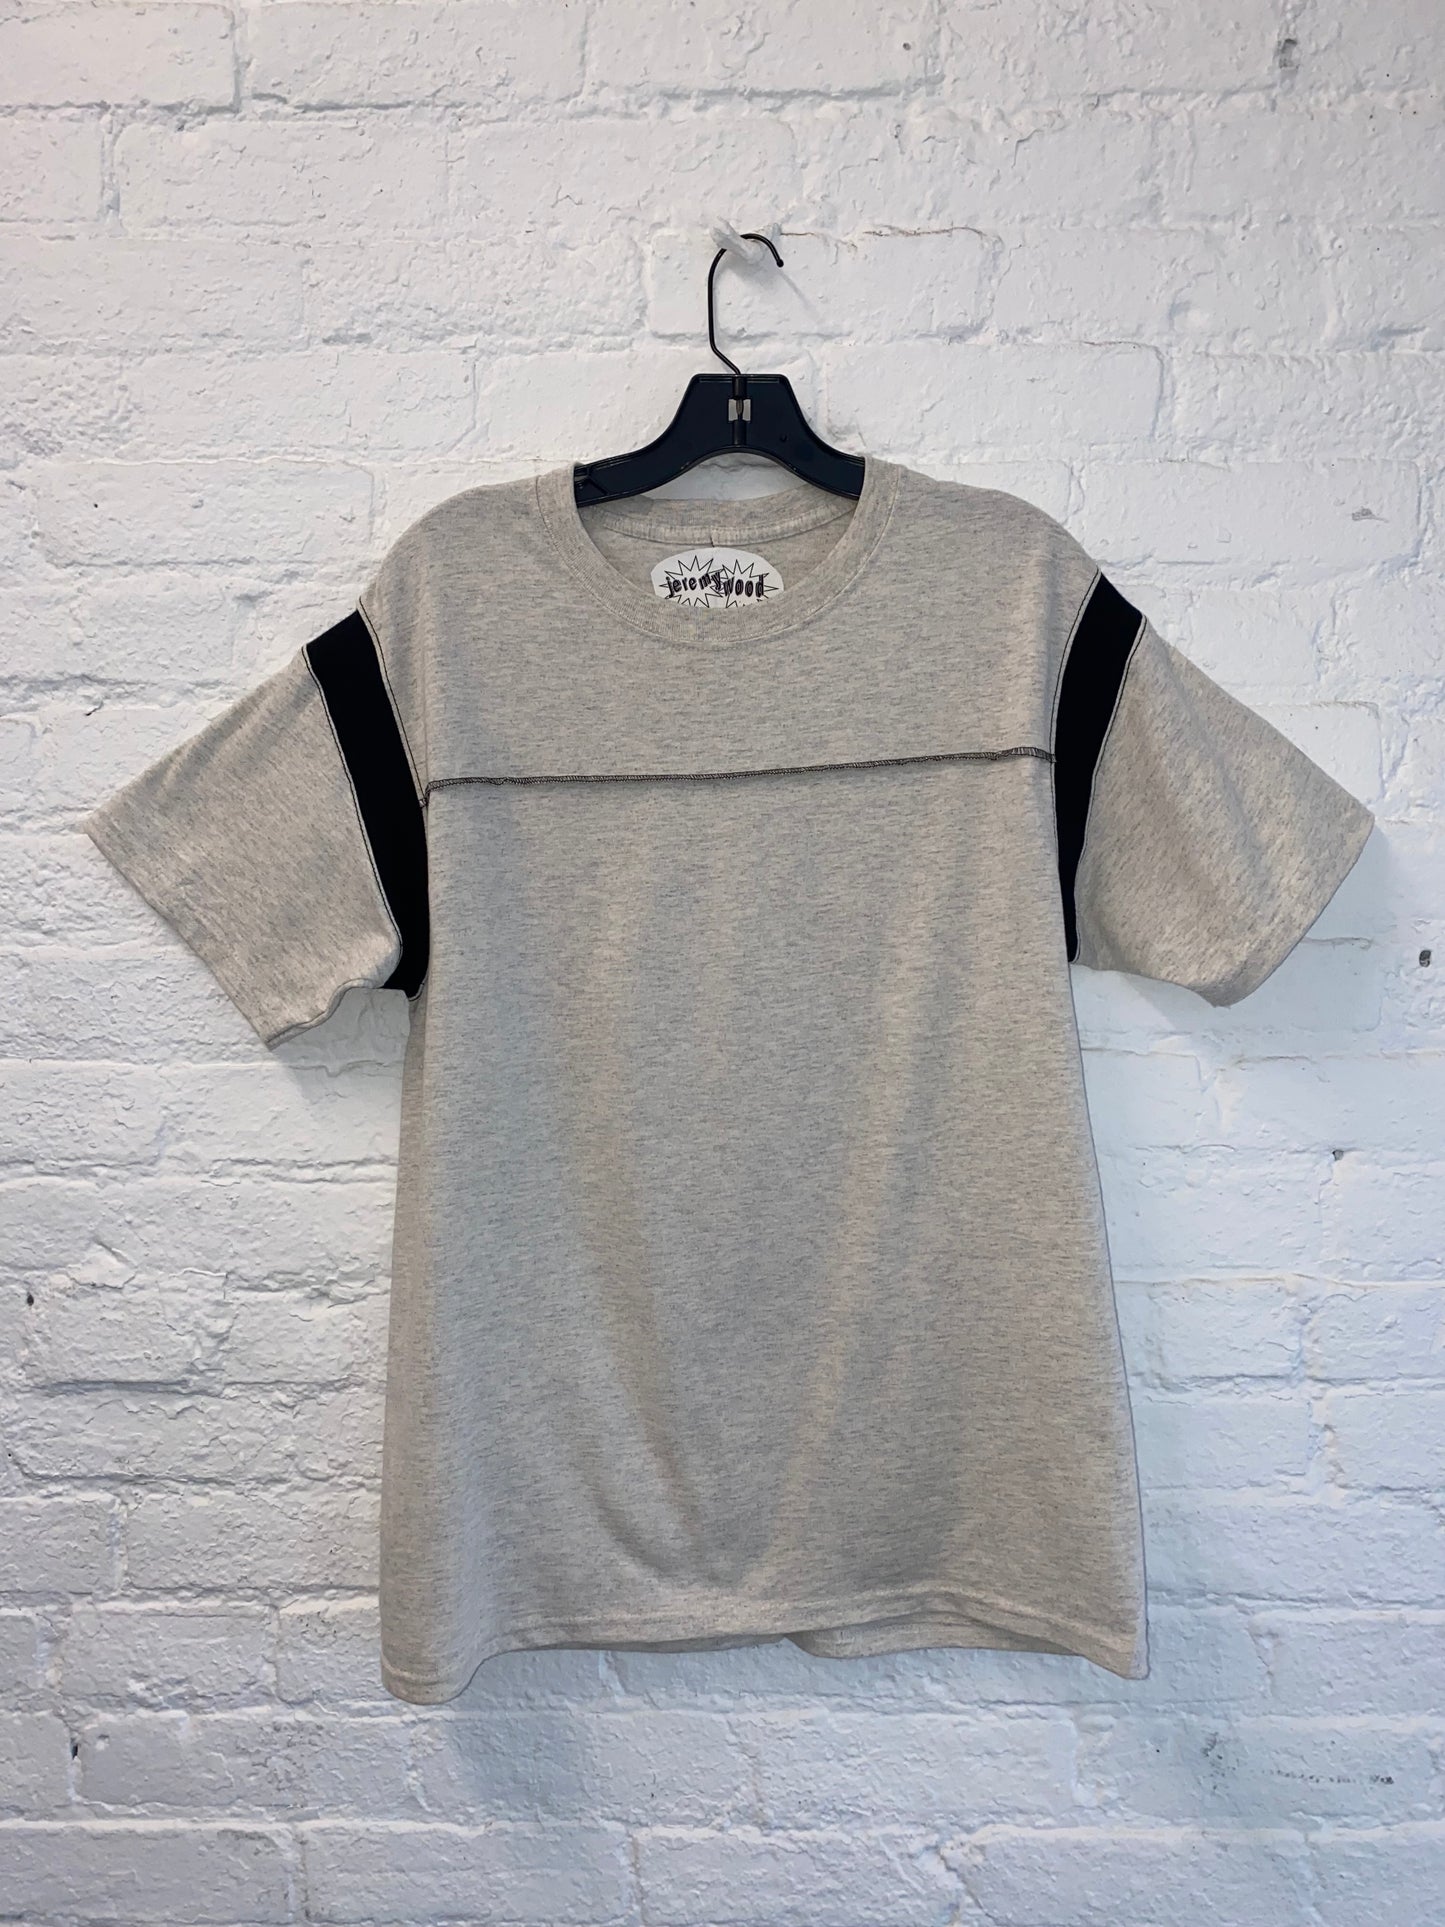 "dither" tee